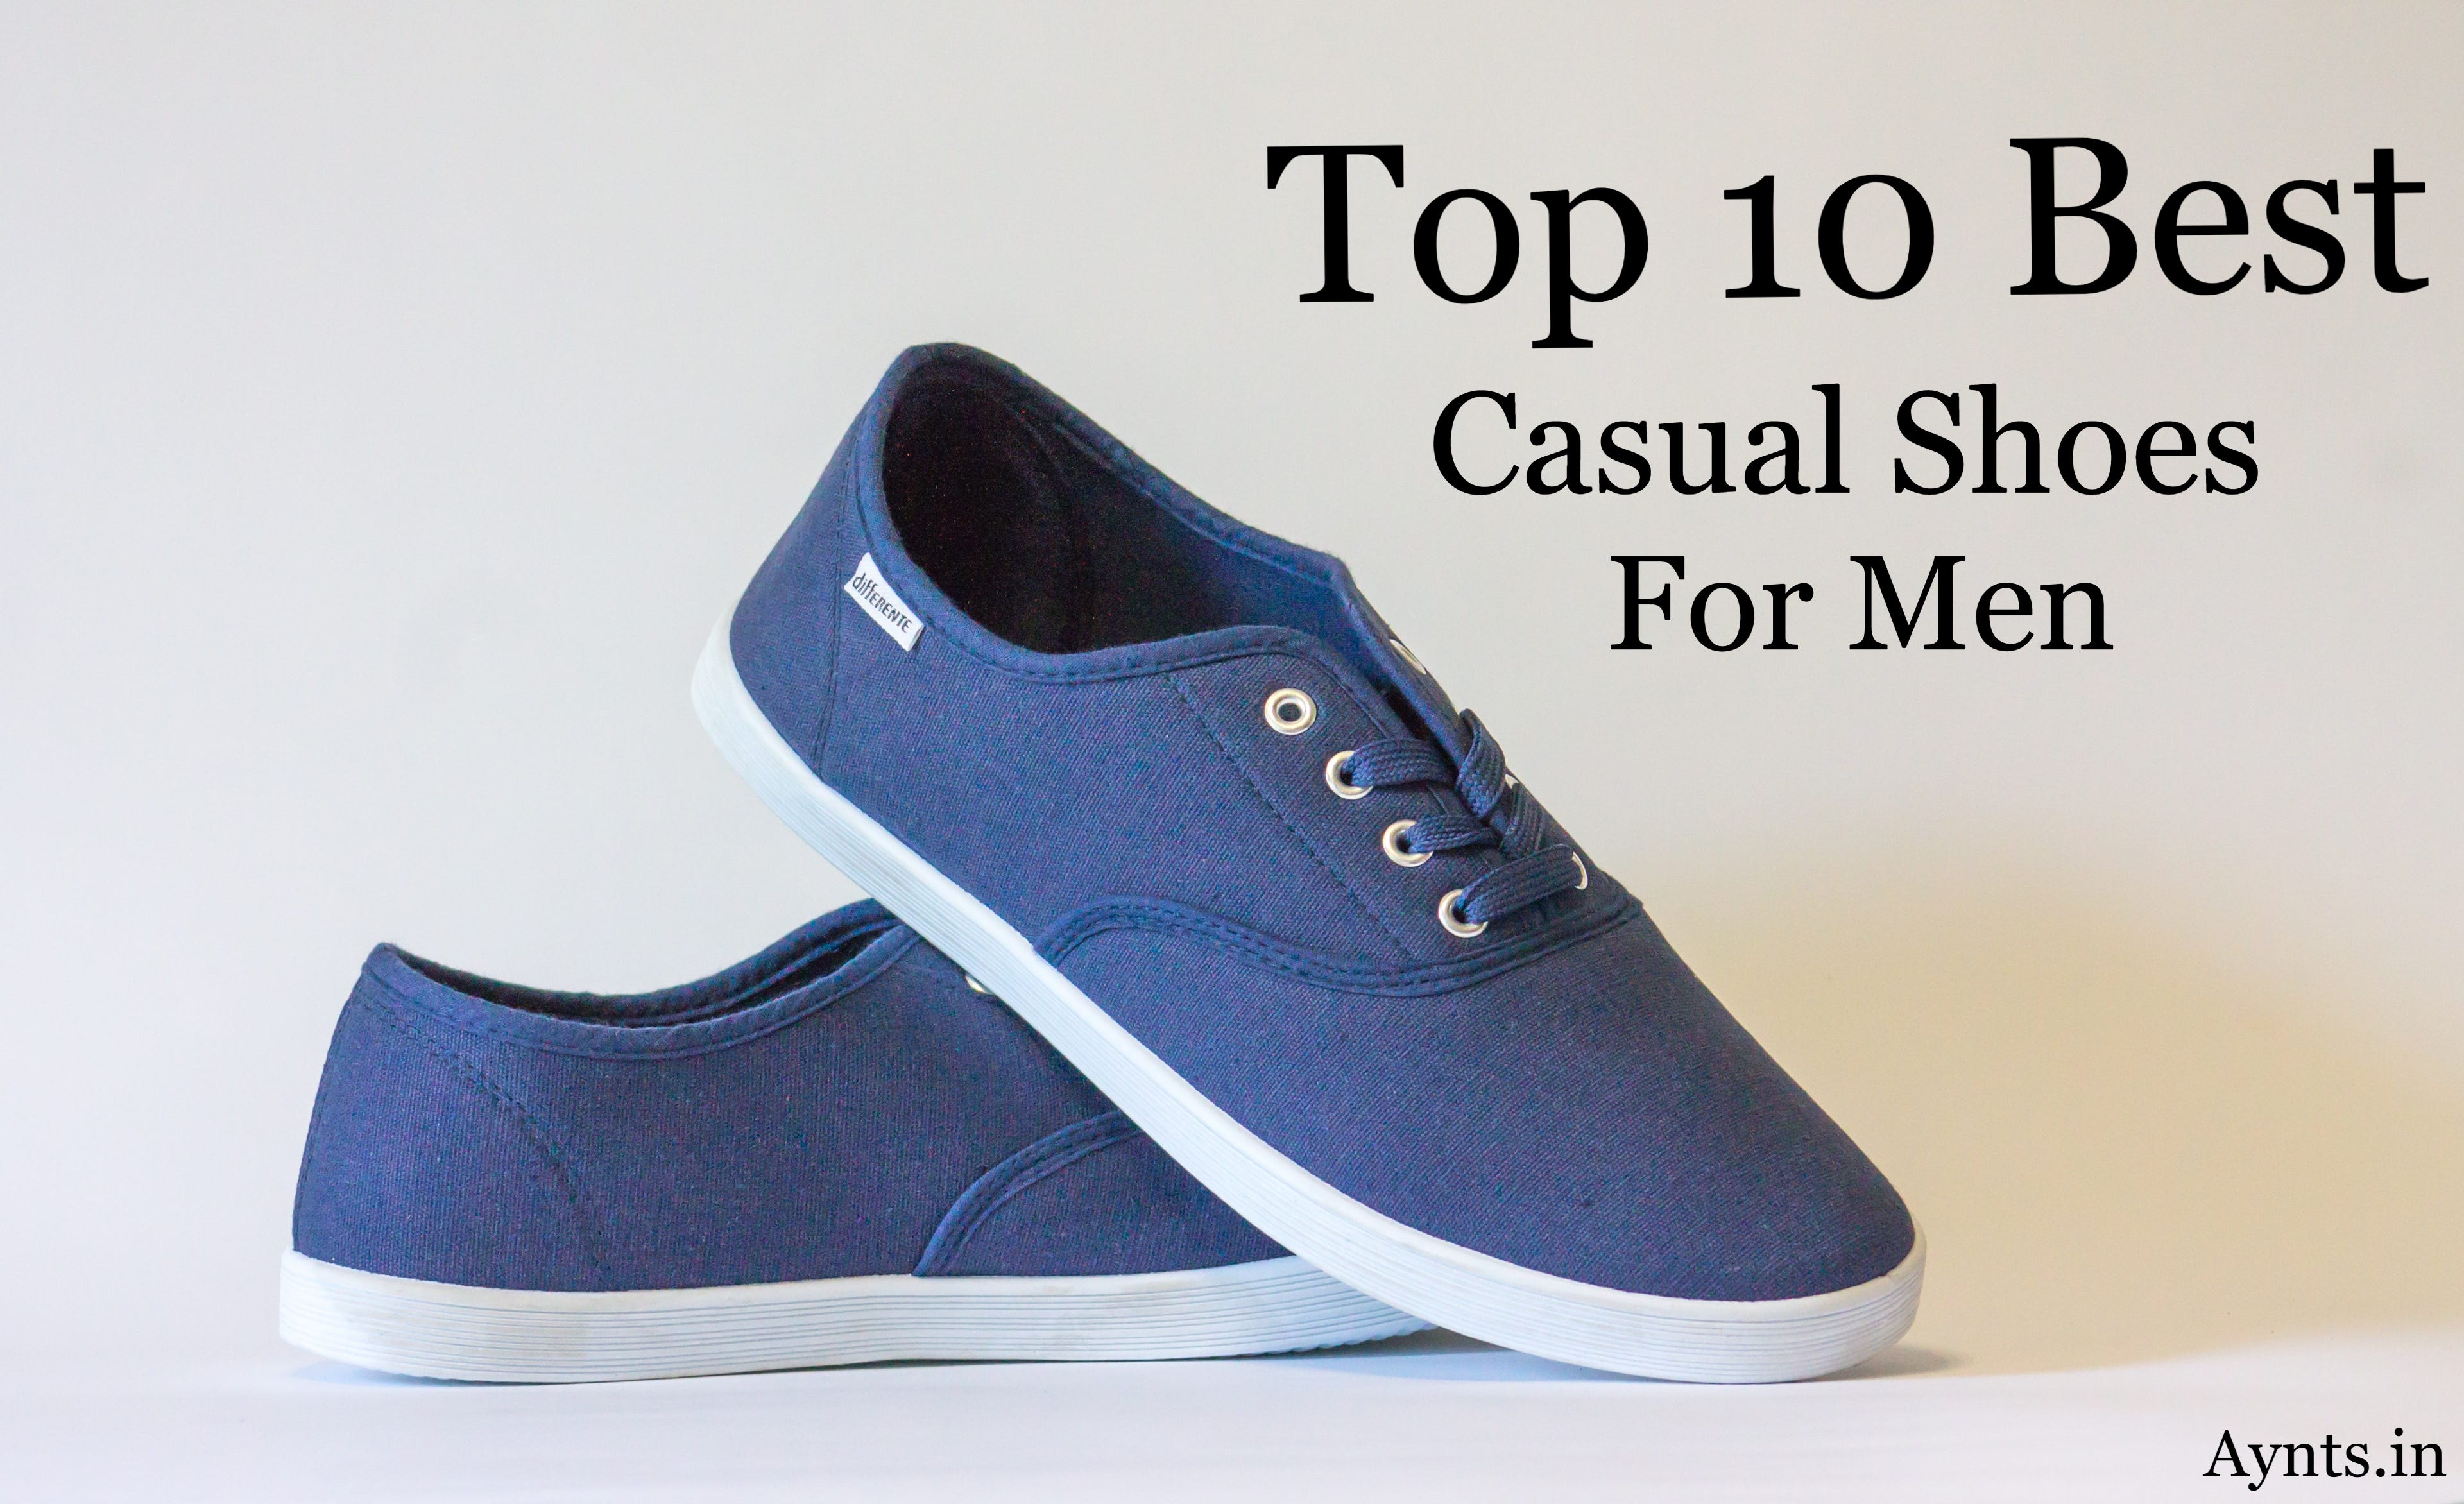 best casual shoes for men under 500